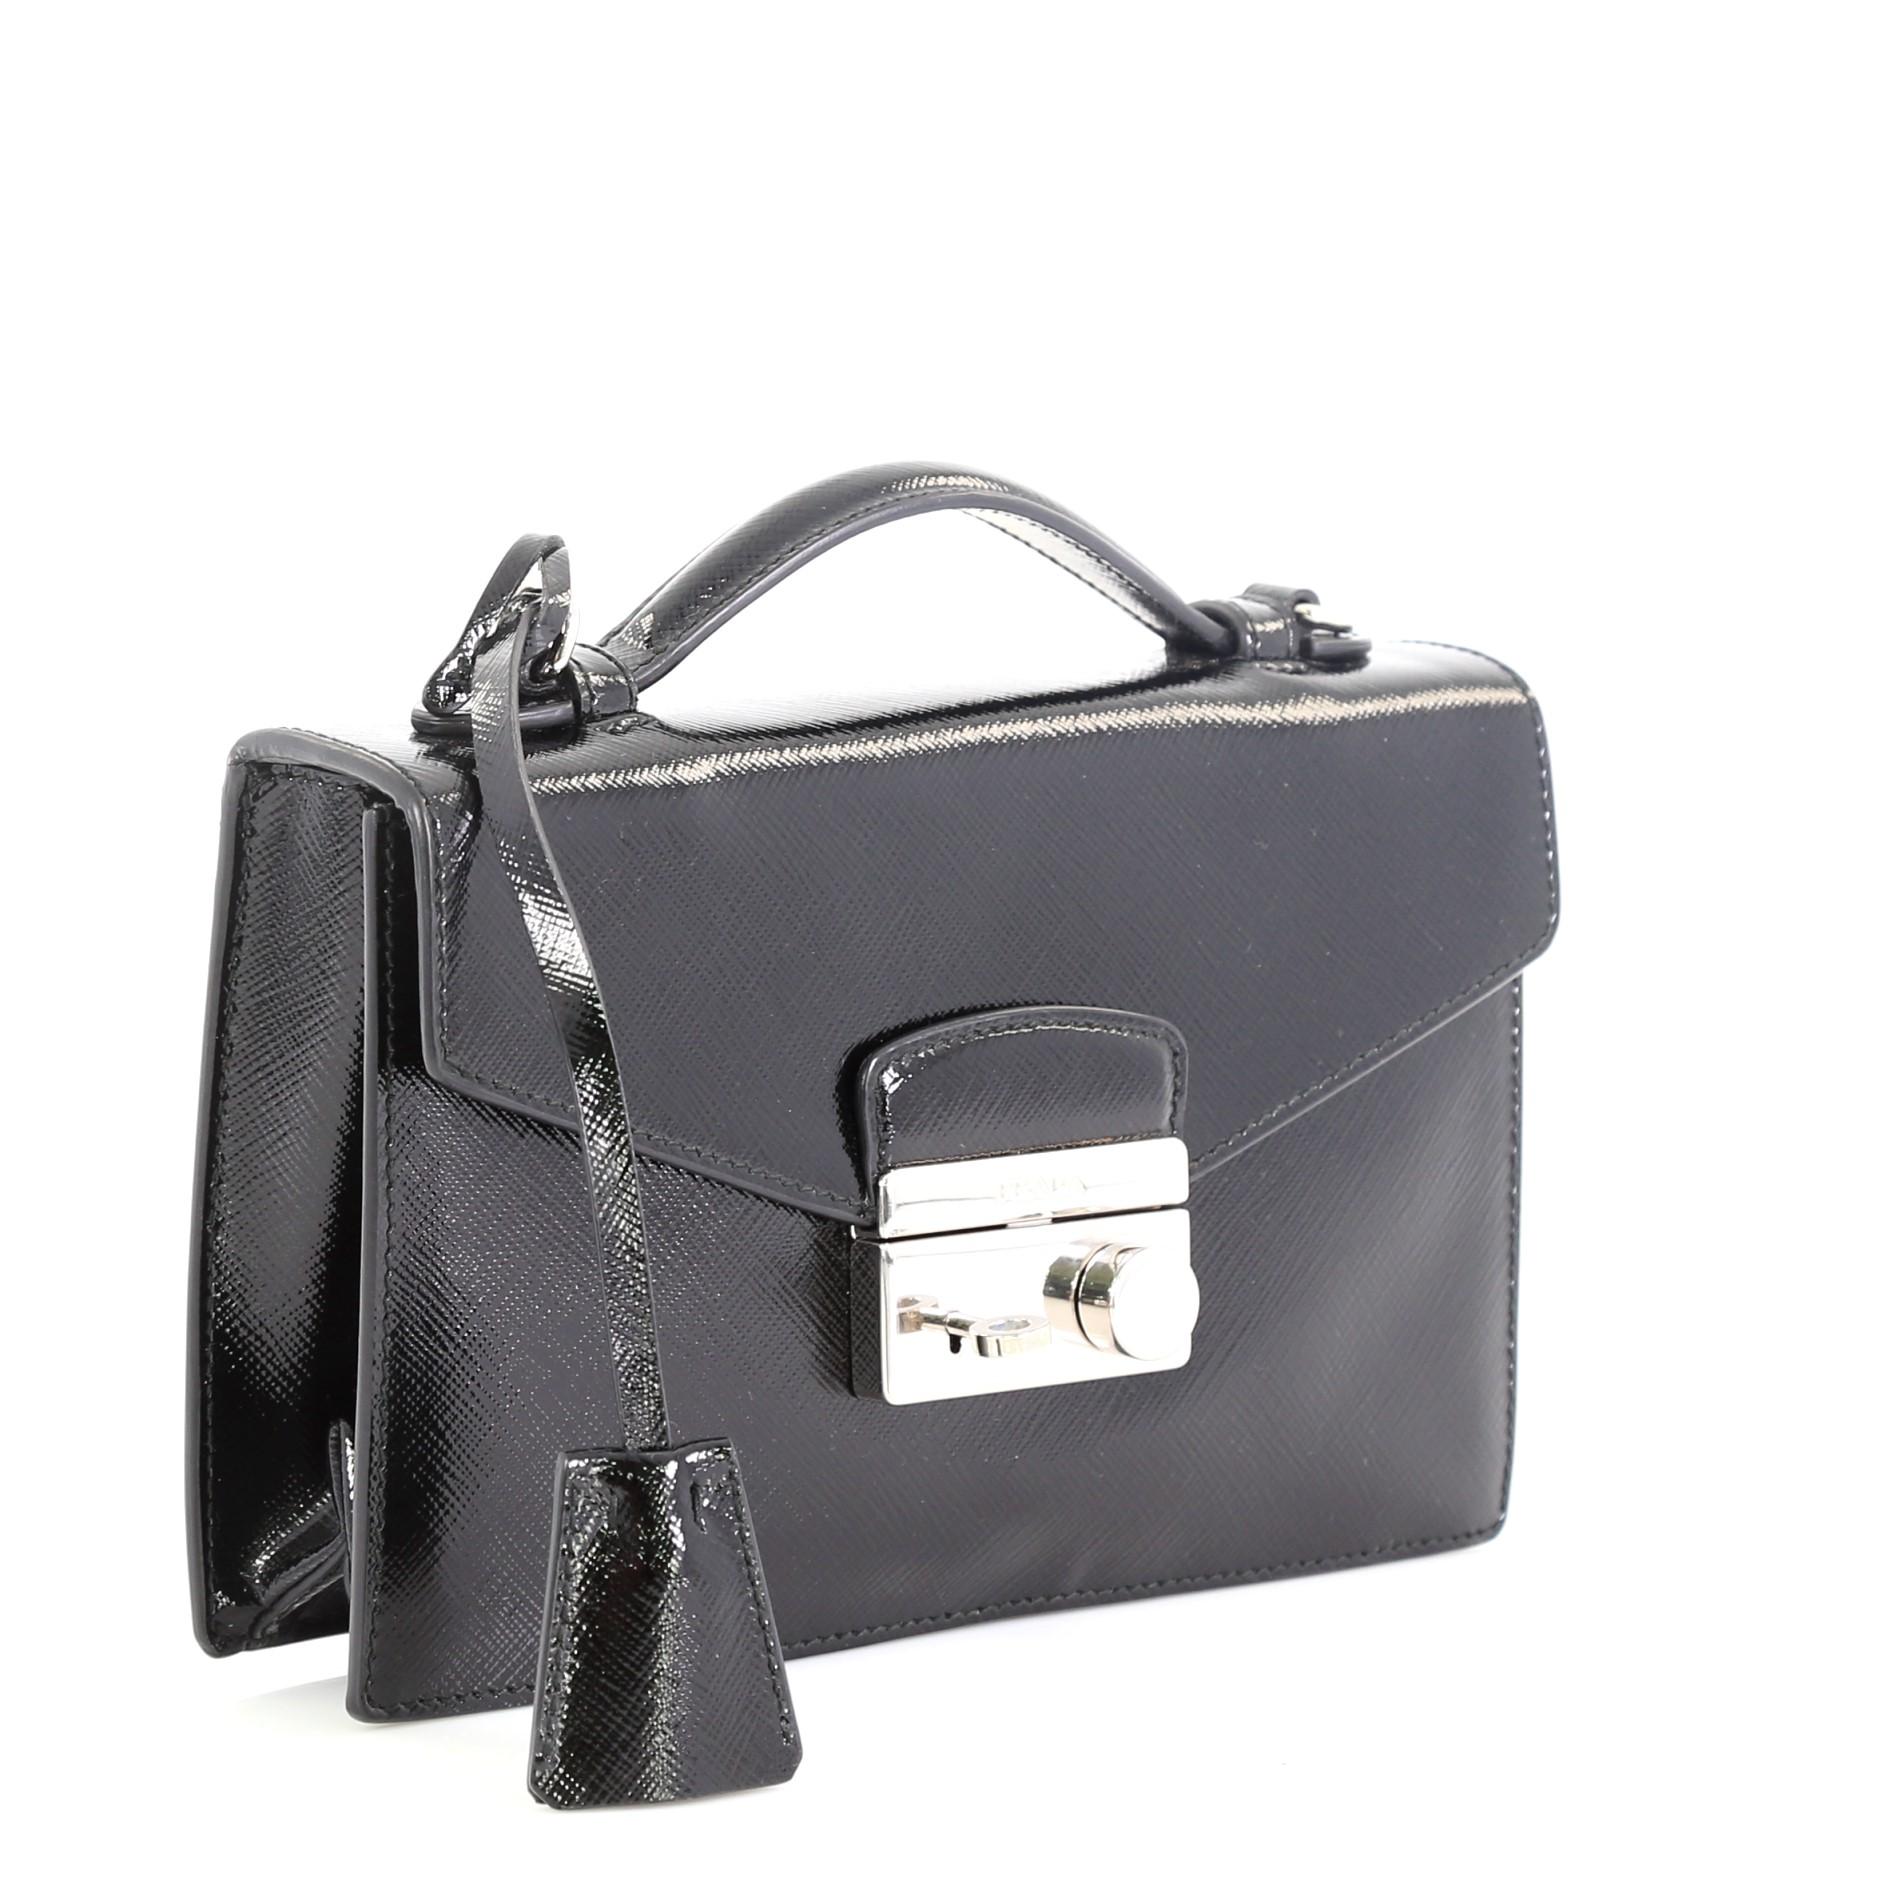 This Prada Convertible Sound Bag Vernice Saffiano Leather Small, crafted in black vernice leather, features a short top leather handle, frontal flap with engraved side press closure, long strap and silver-tone hardware. Its press-lock closure opens